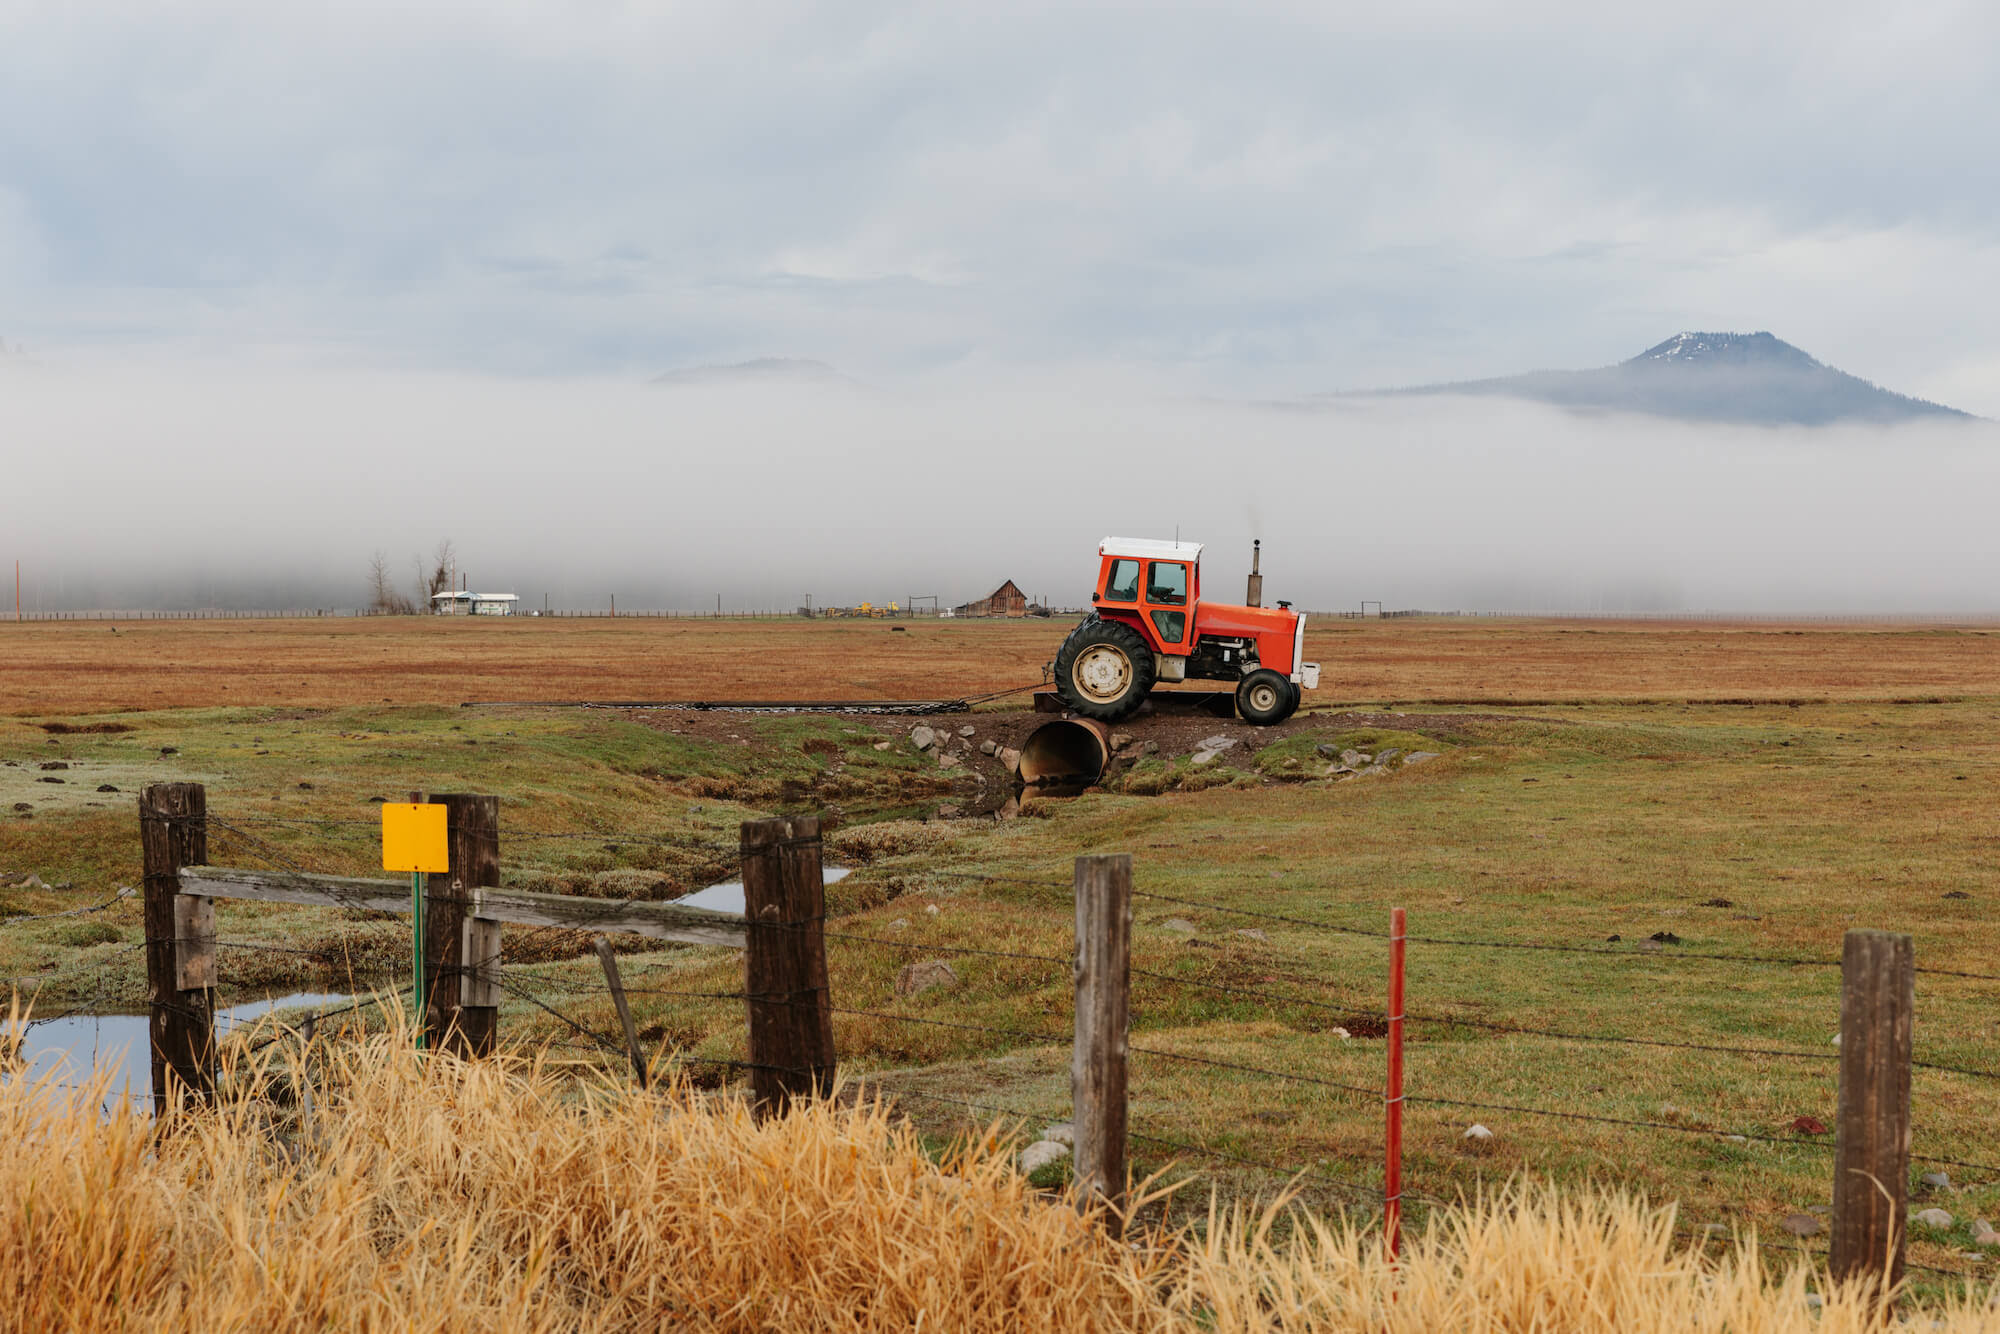 An orange tractor on the horizon of grass with clouds covering the mountains in the distance. Klamath, OR 111921